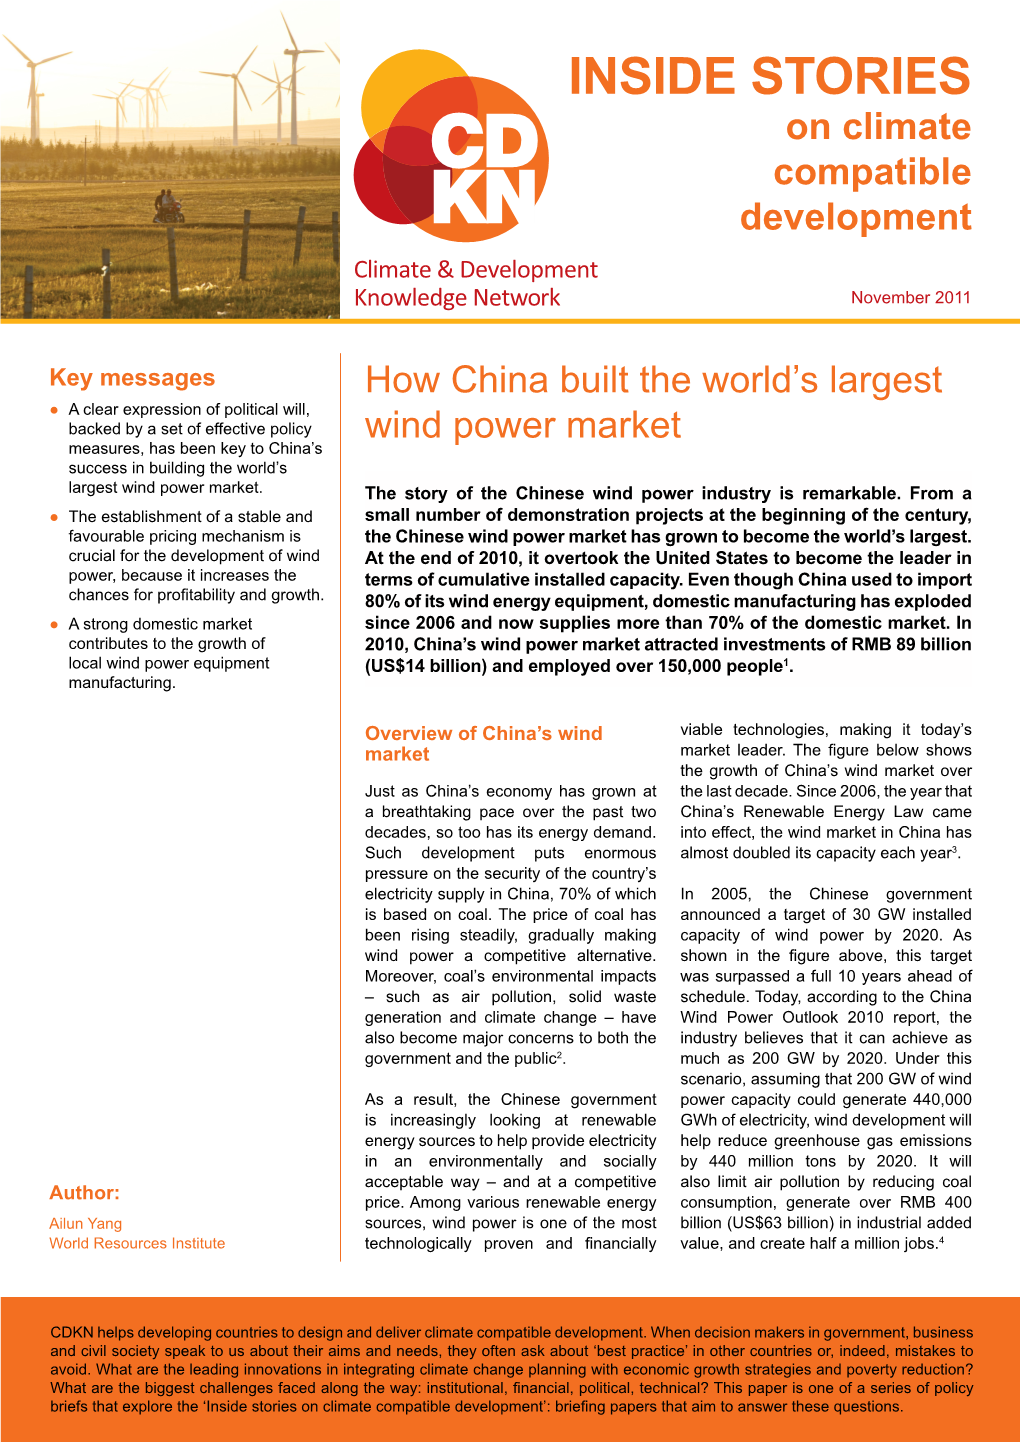 How China Built the World's Largest Wind Power Market